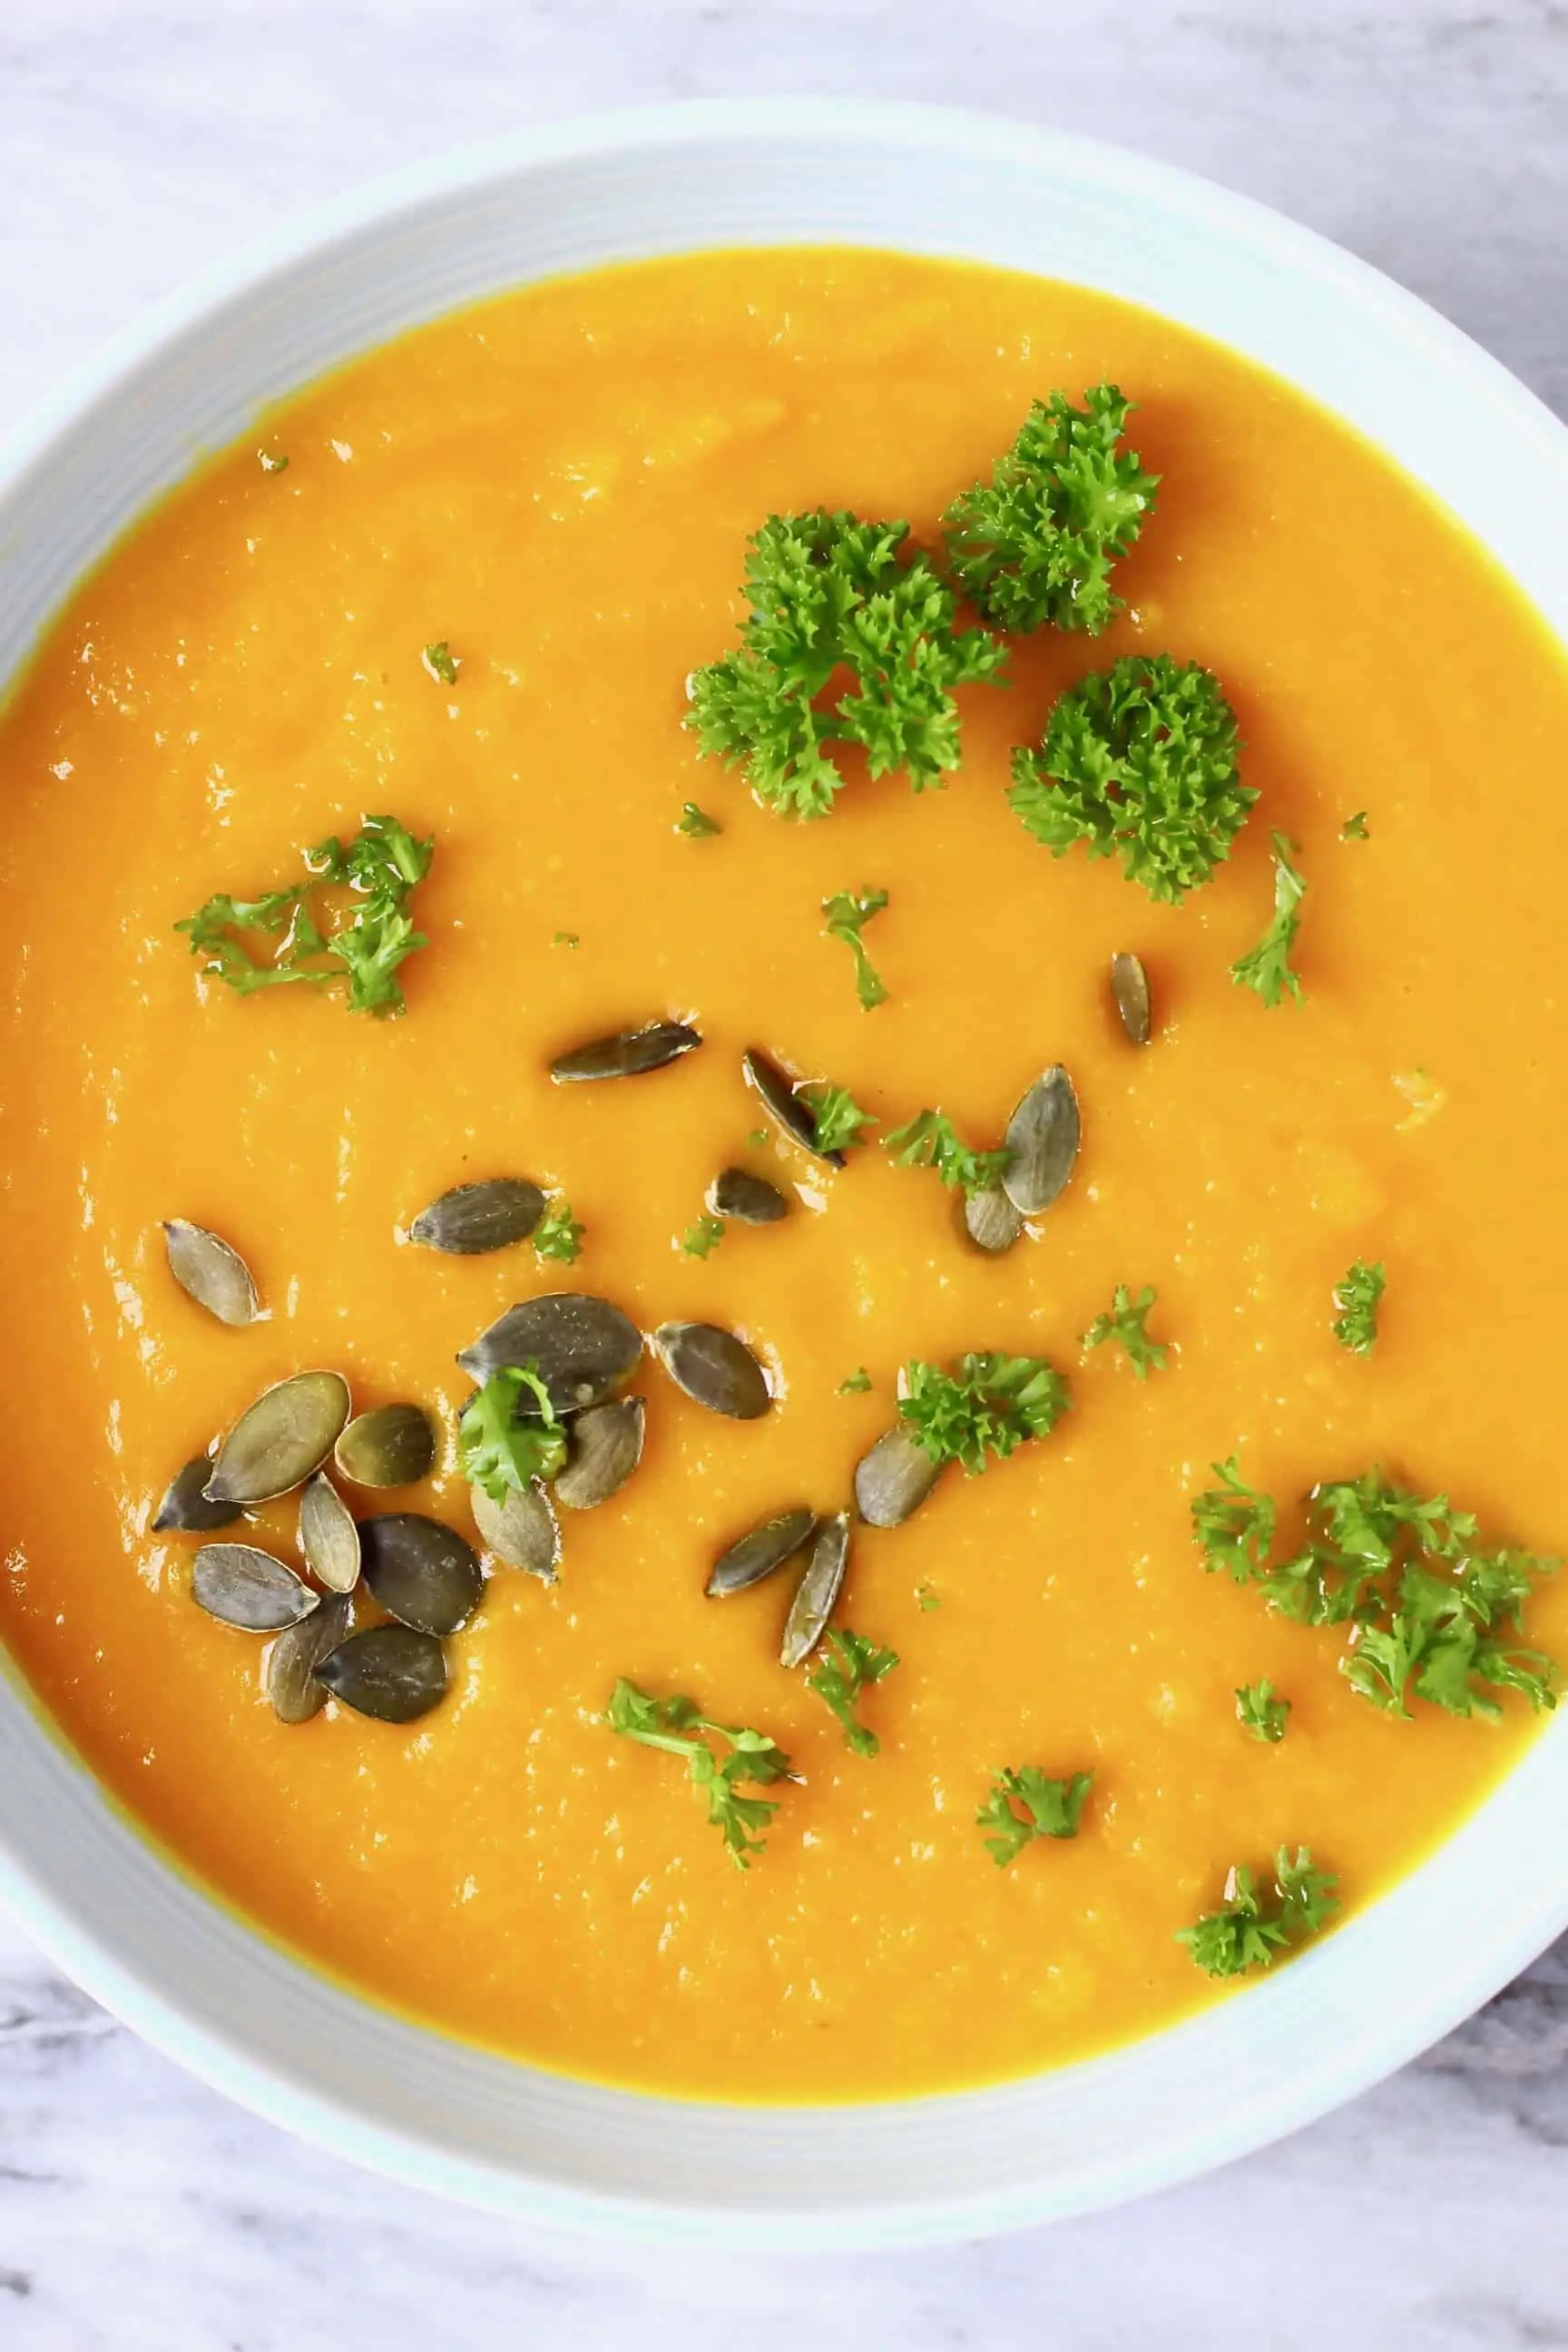 Smooth orange pumpkin soup topped with green pumpkin seeds and curly parsley in a light blue bowl against a marble background